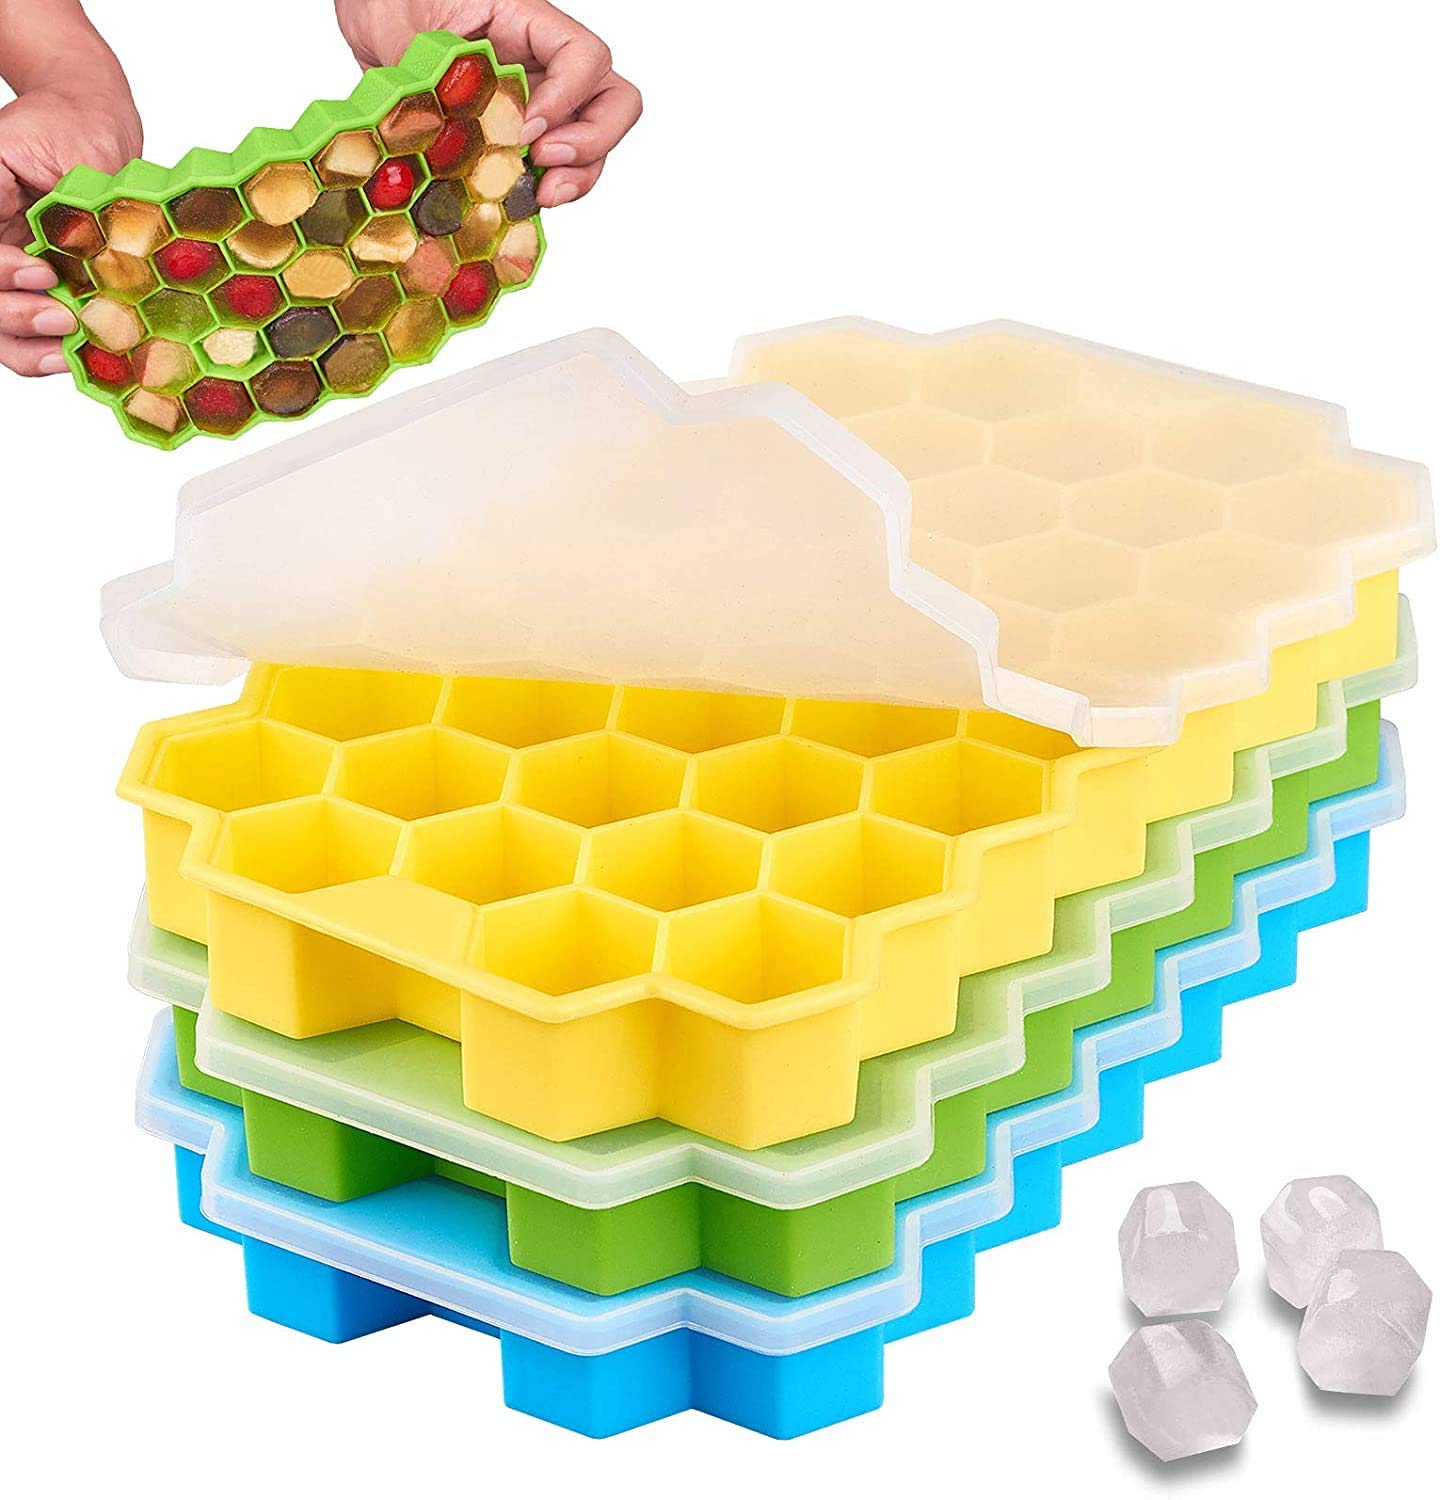 Silicone Ice Ball Mold, Ice Ball Maker Mold 37 Cavity Silicon Ice Tray For Freezer Ice Cube